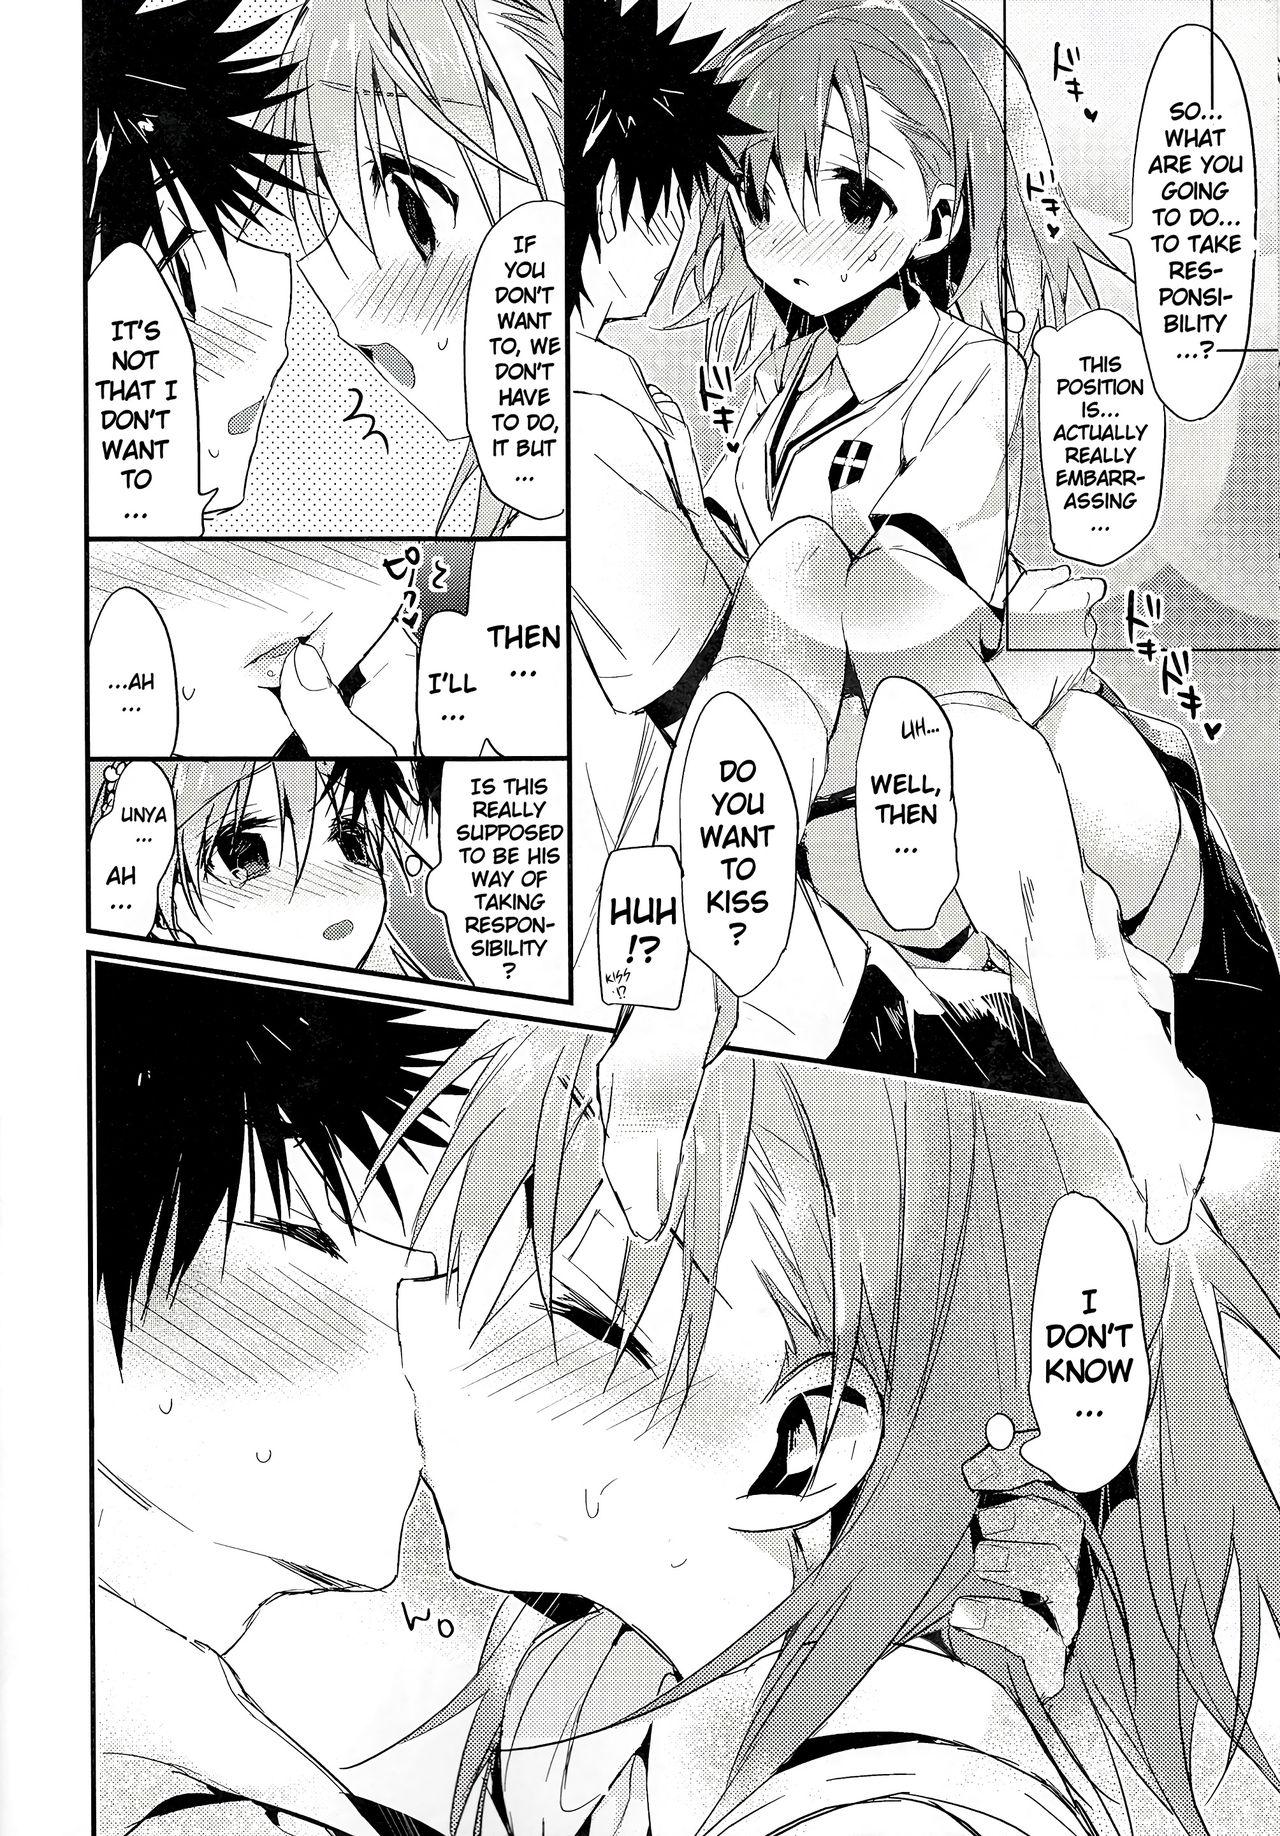 Jerking Mikoto to. 5 | With Mikoto. 5 - Toaru majutsu no index | a certain magical index Blowjob - Page 12